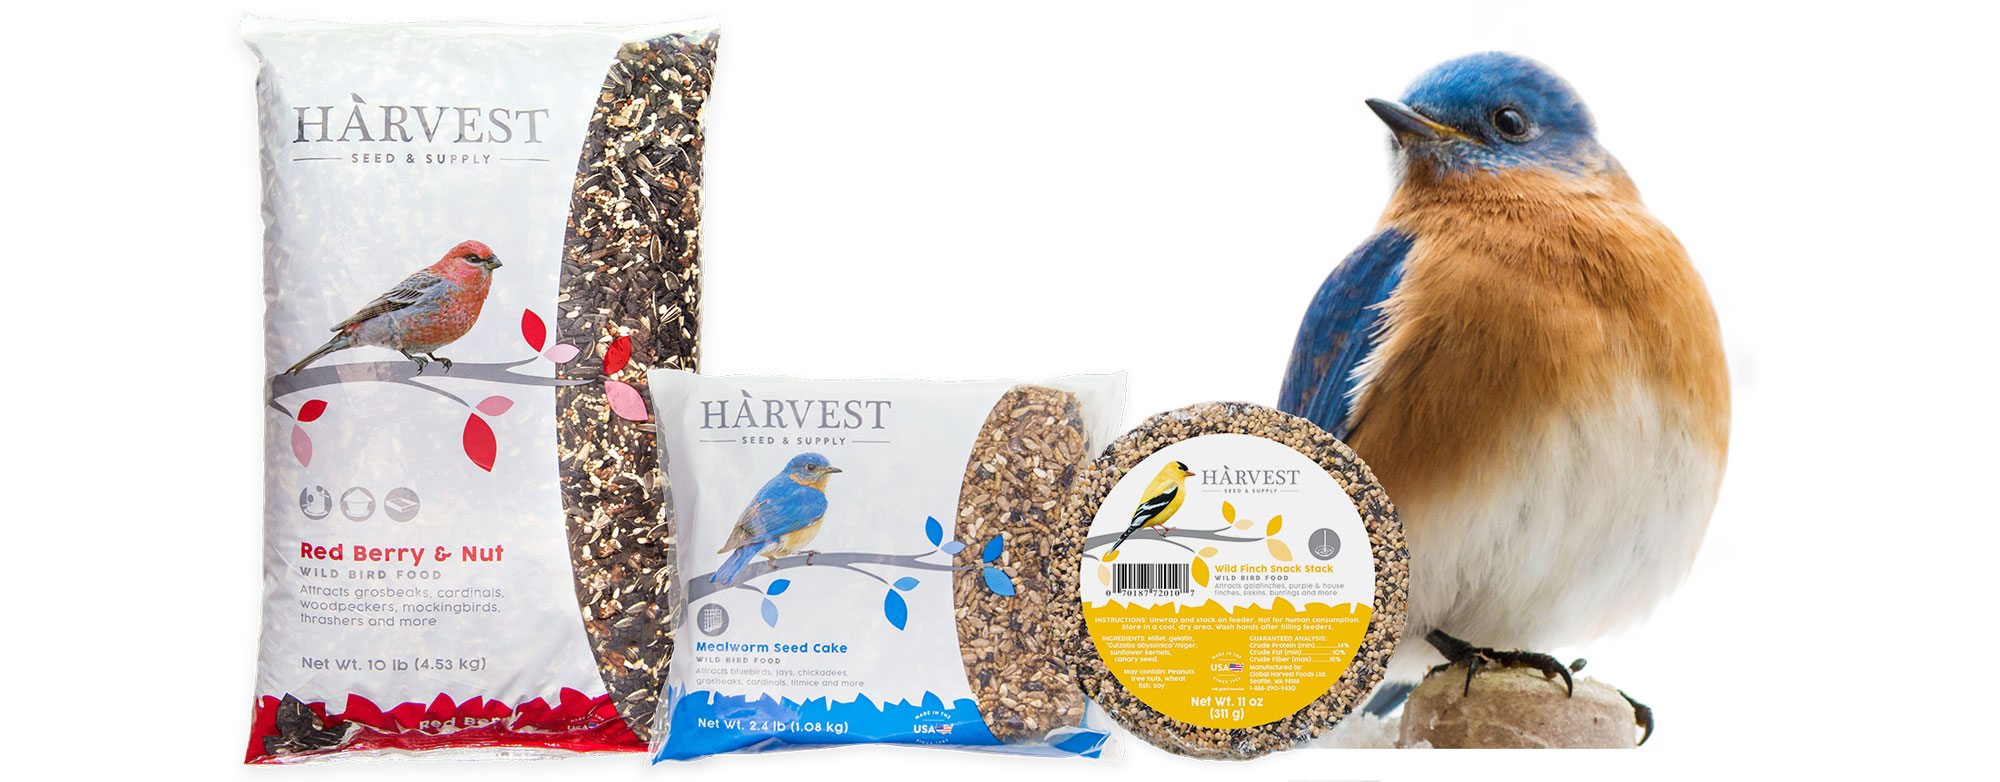 Harvest is a new line of simple, natural, family-made wild bird food created right here in America.